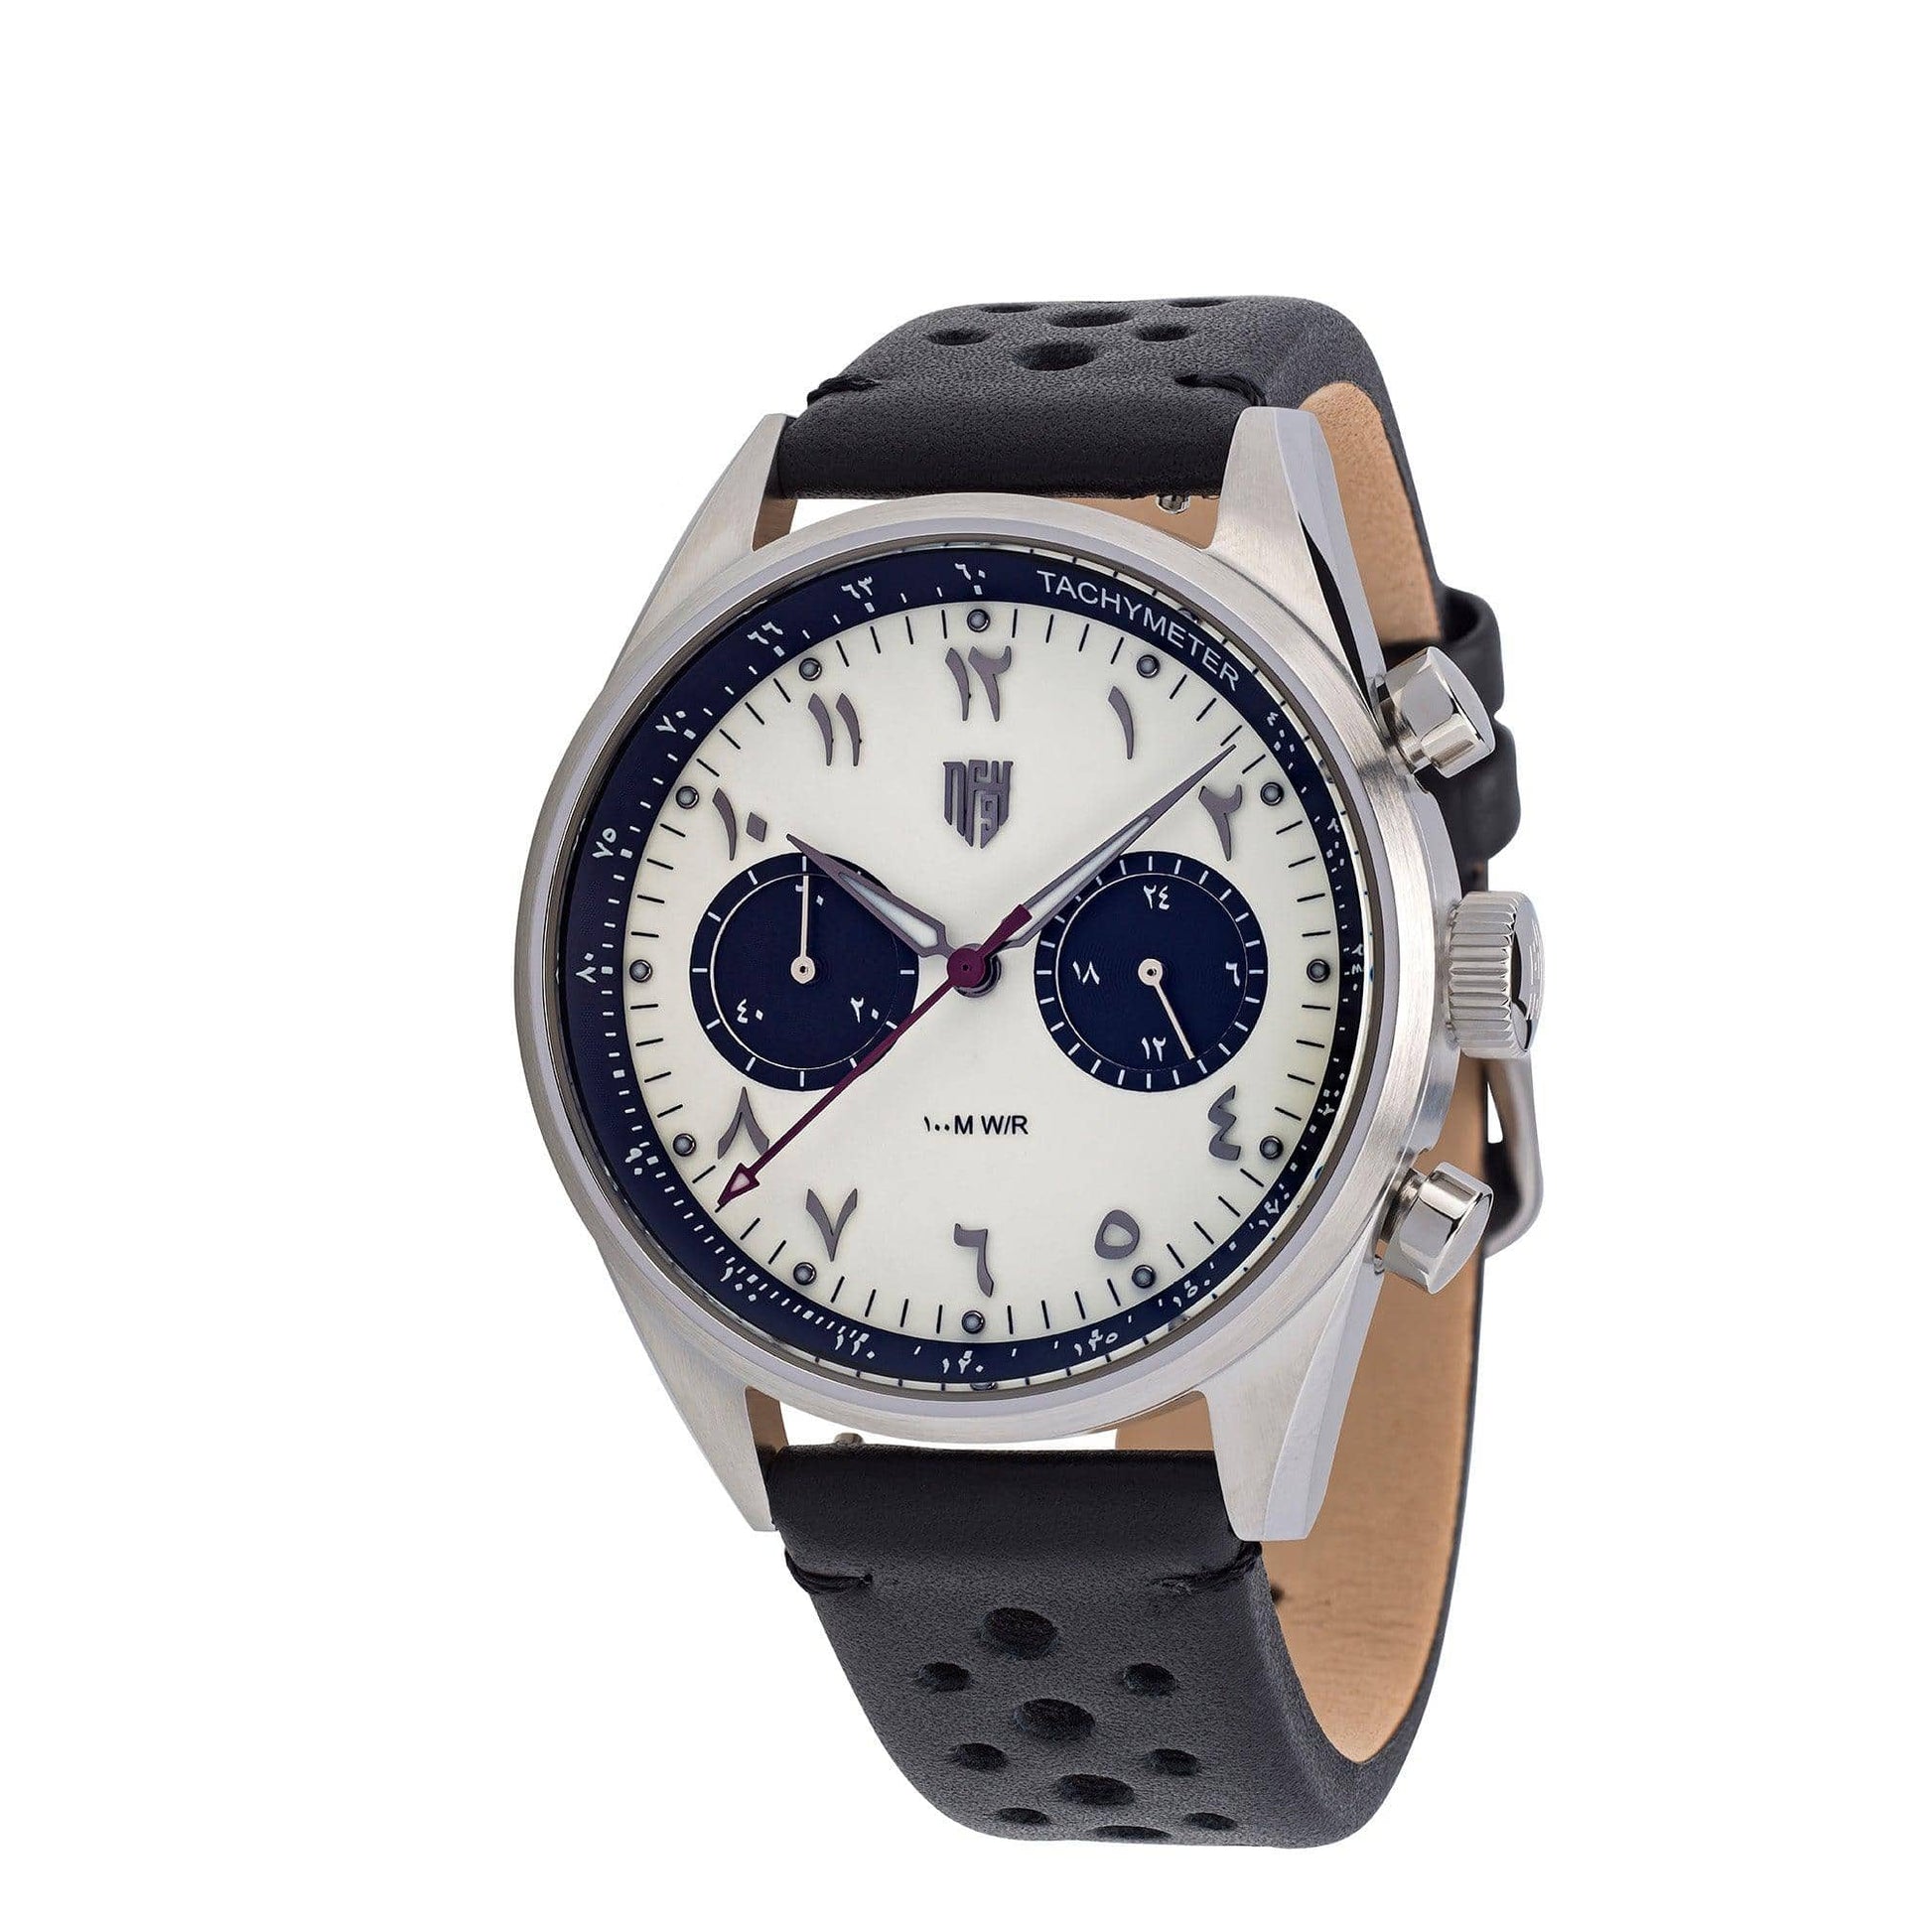 Culture Chronograph 2 -Panda/Red - Nine Four Watches